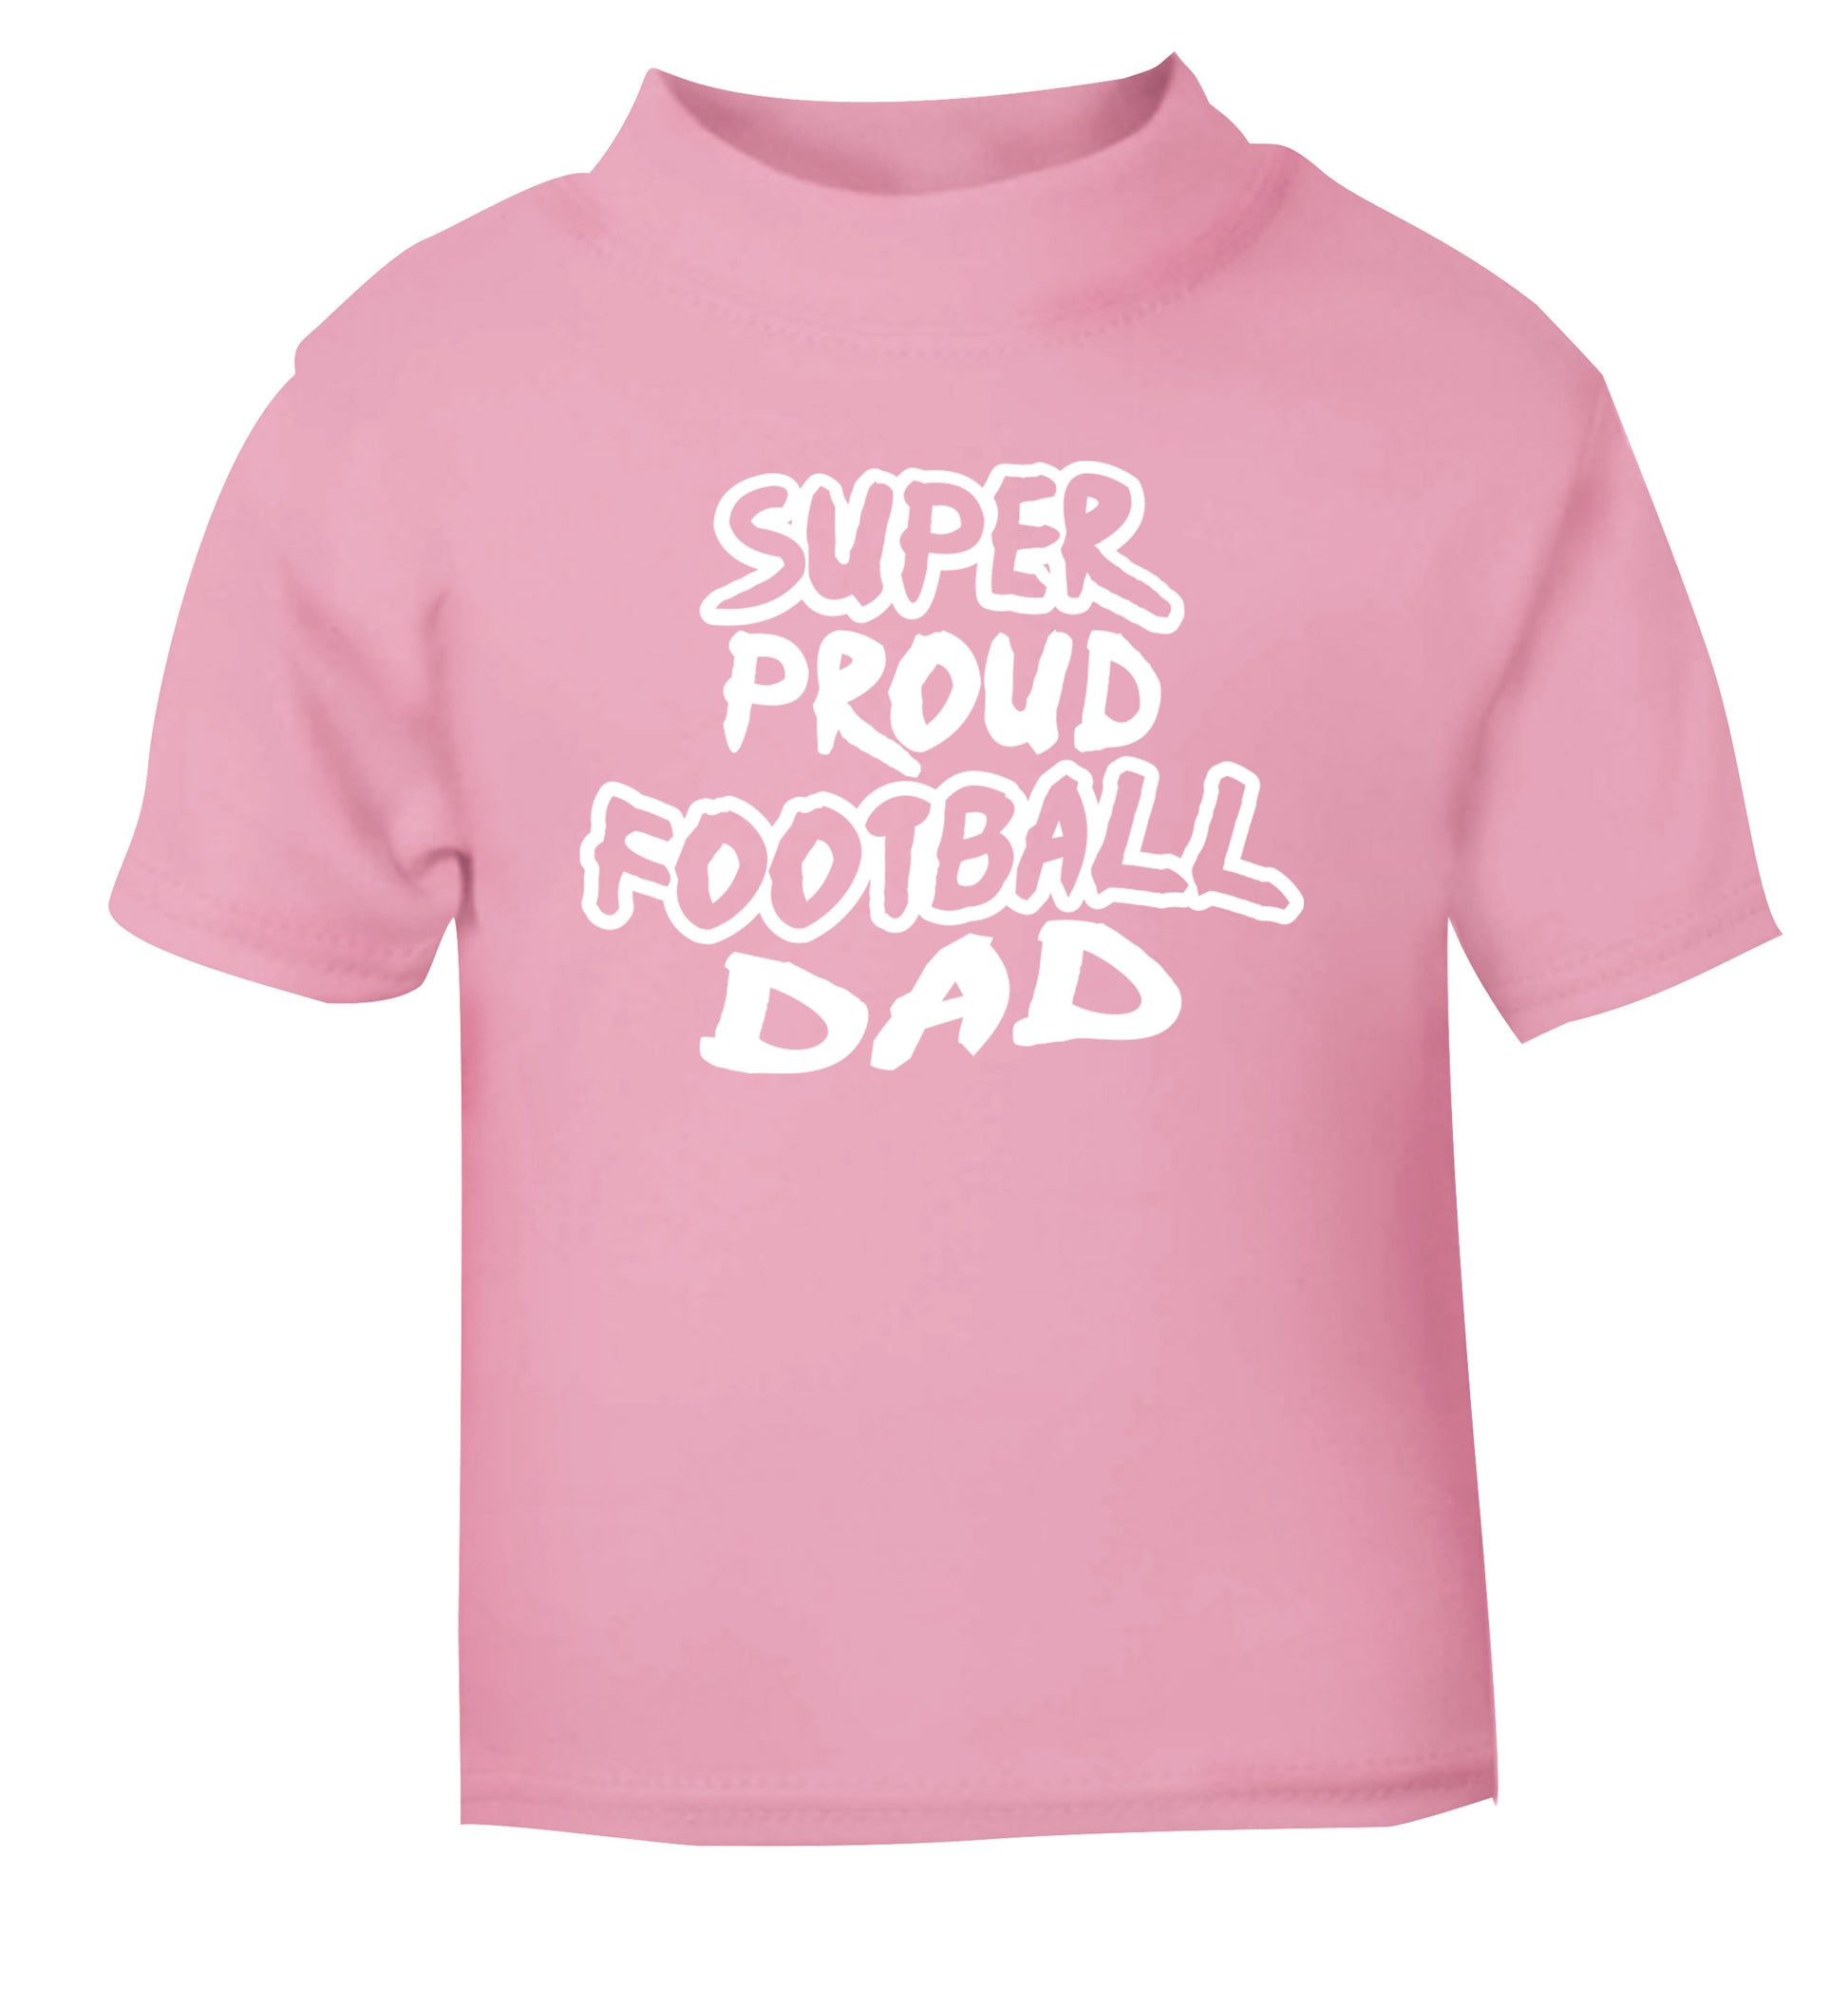 Super proud football dad light pink Baby Toddler Tshirt 2 Years